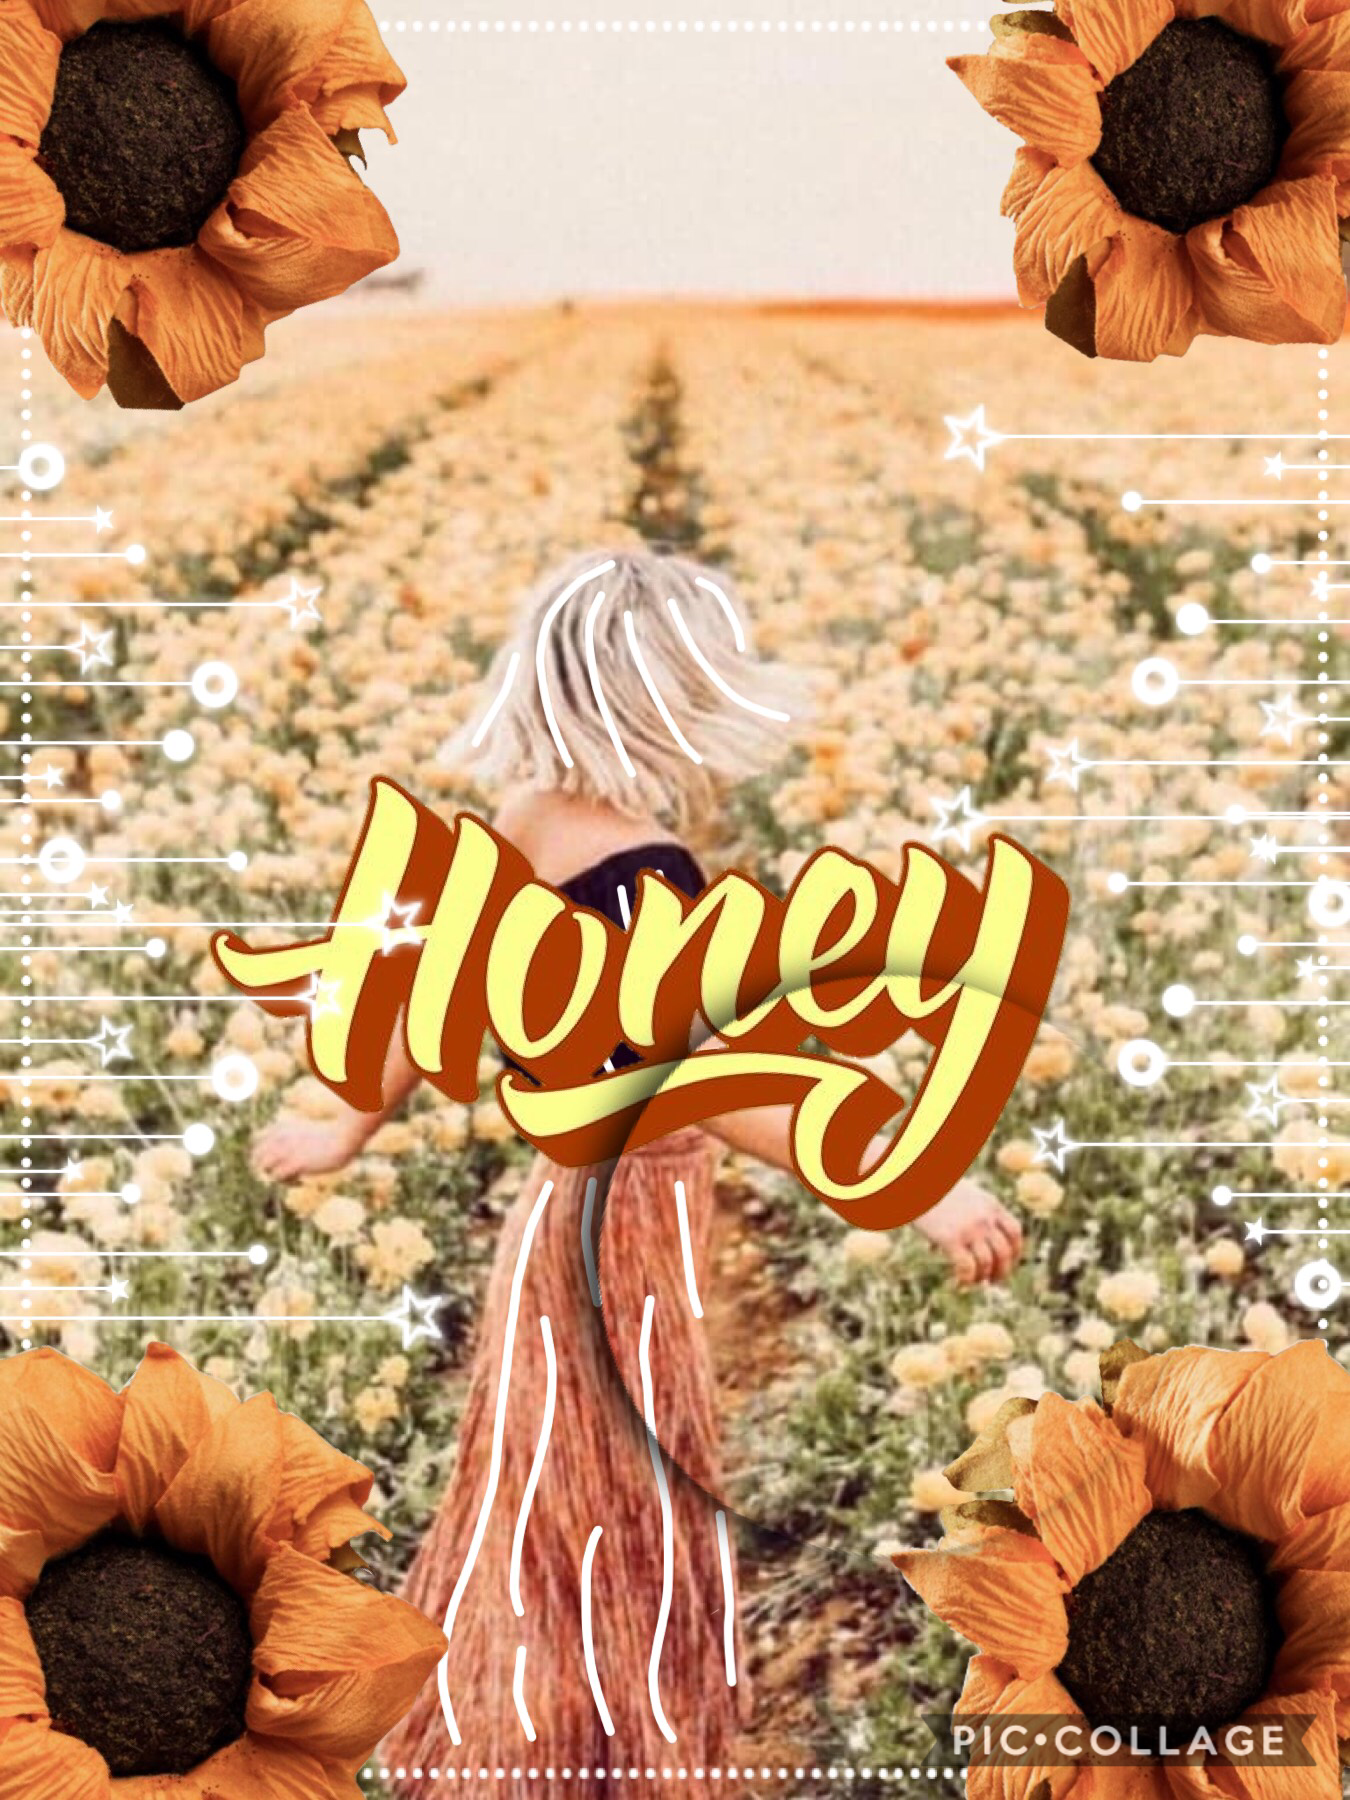 🌻Tap Here🌻
Honey! Made this with Micah!